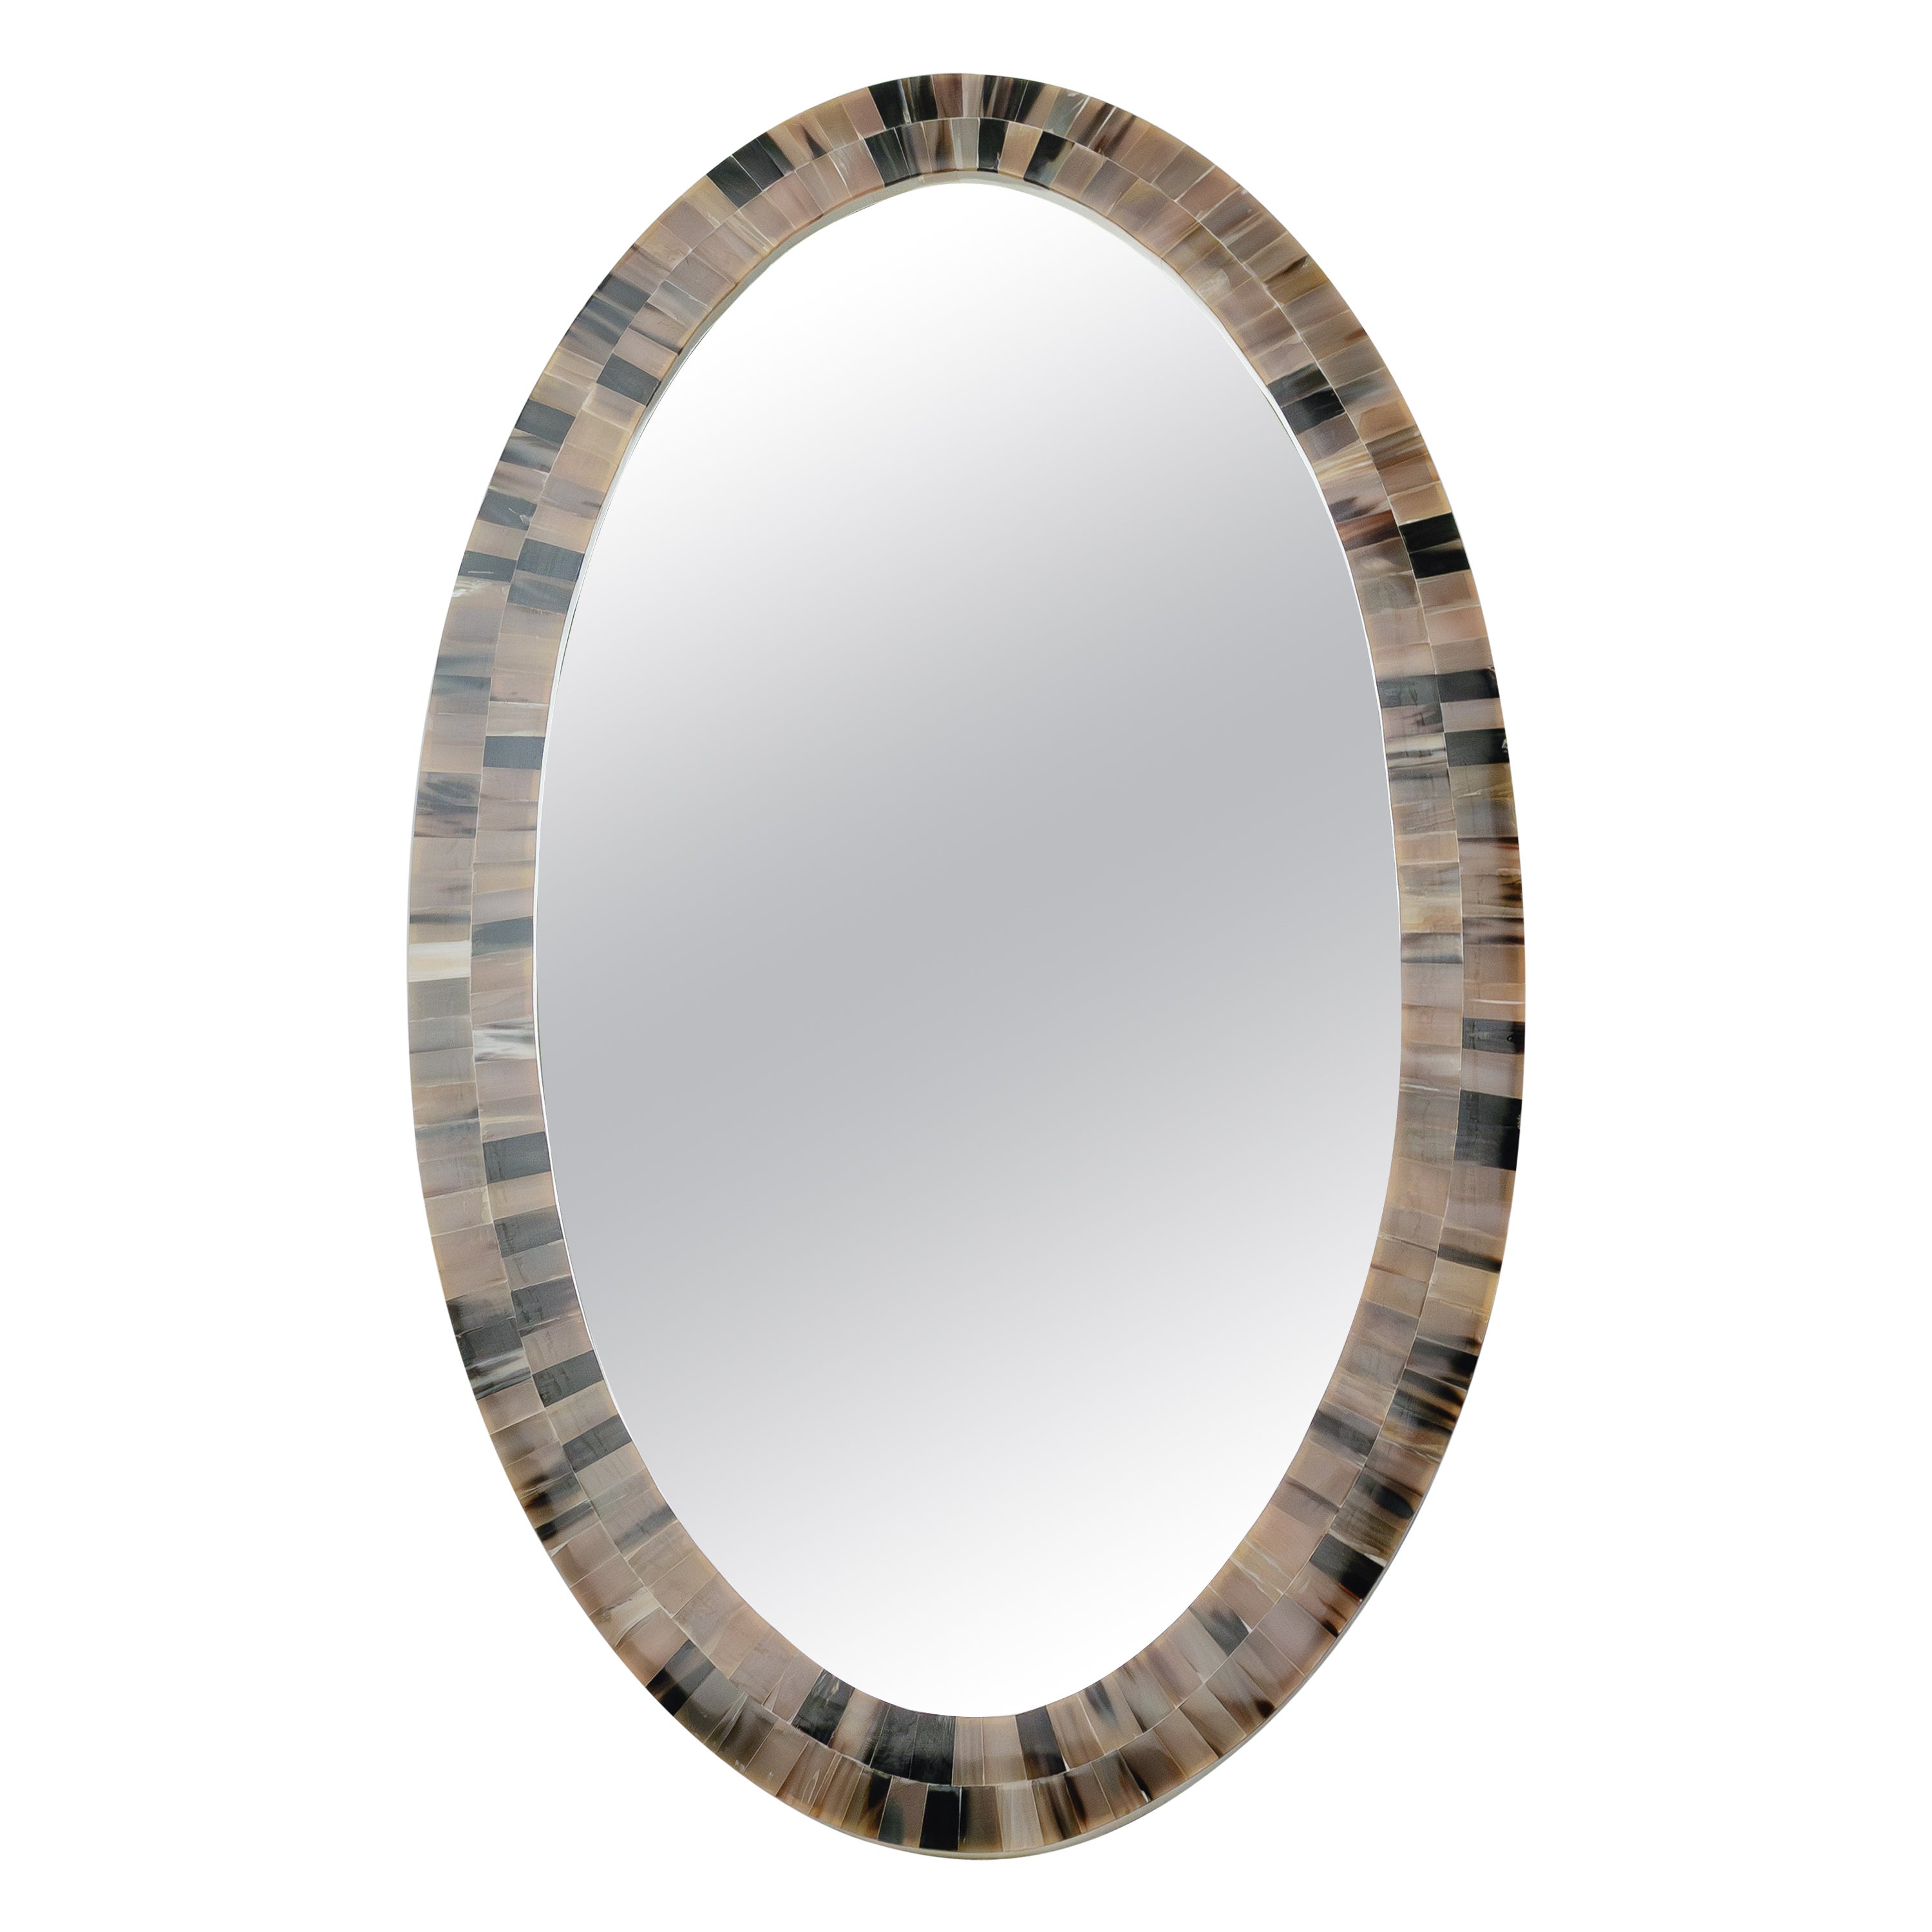 Oval Horn Mirror- The Orbit For Sale